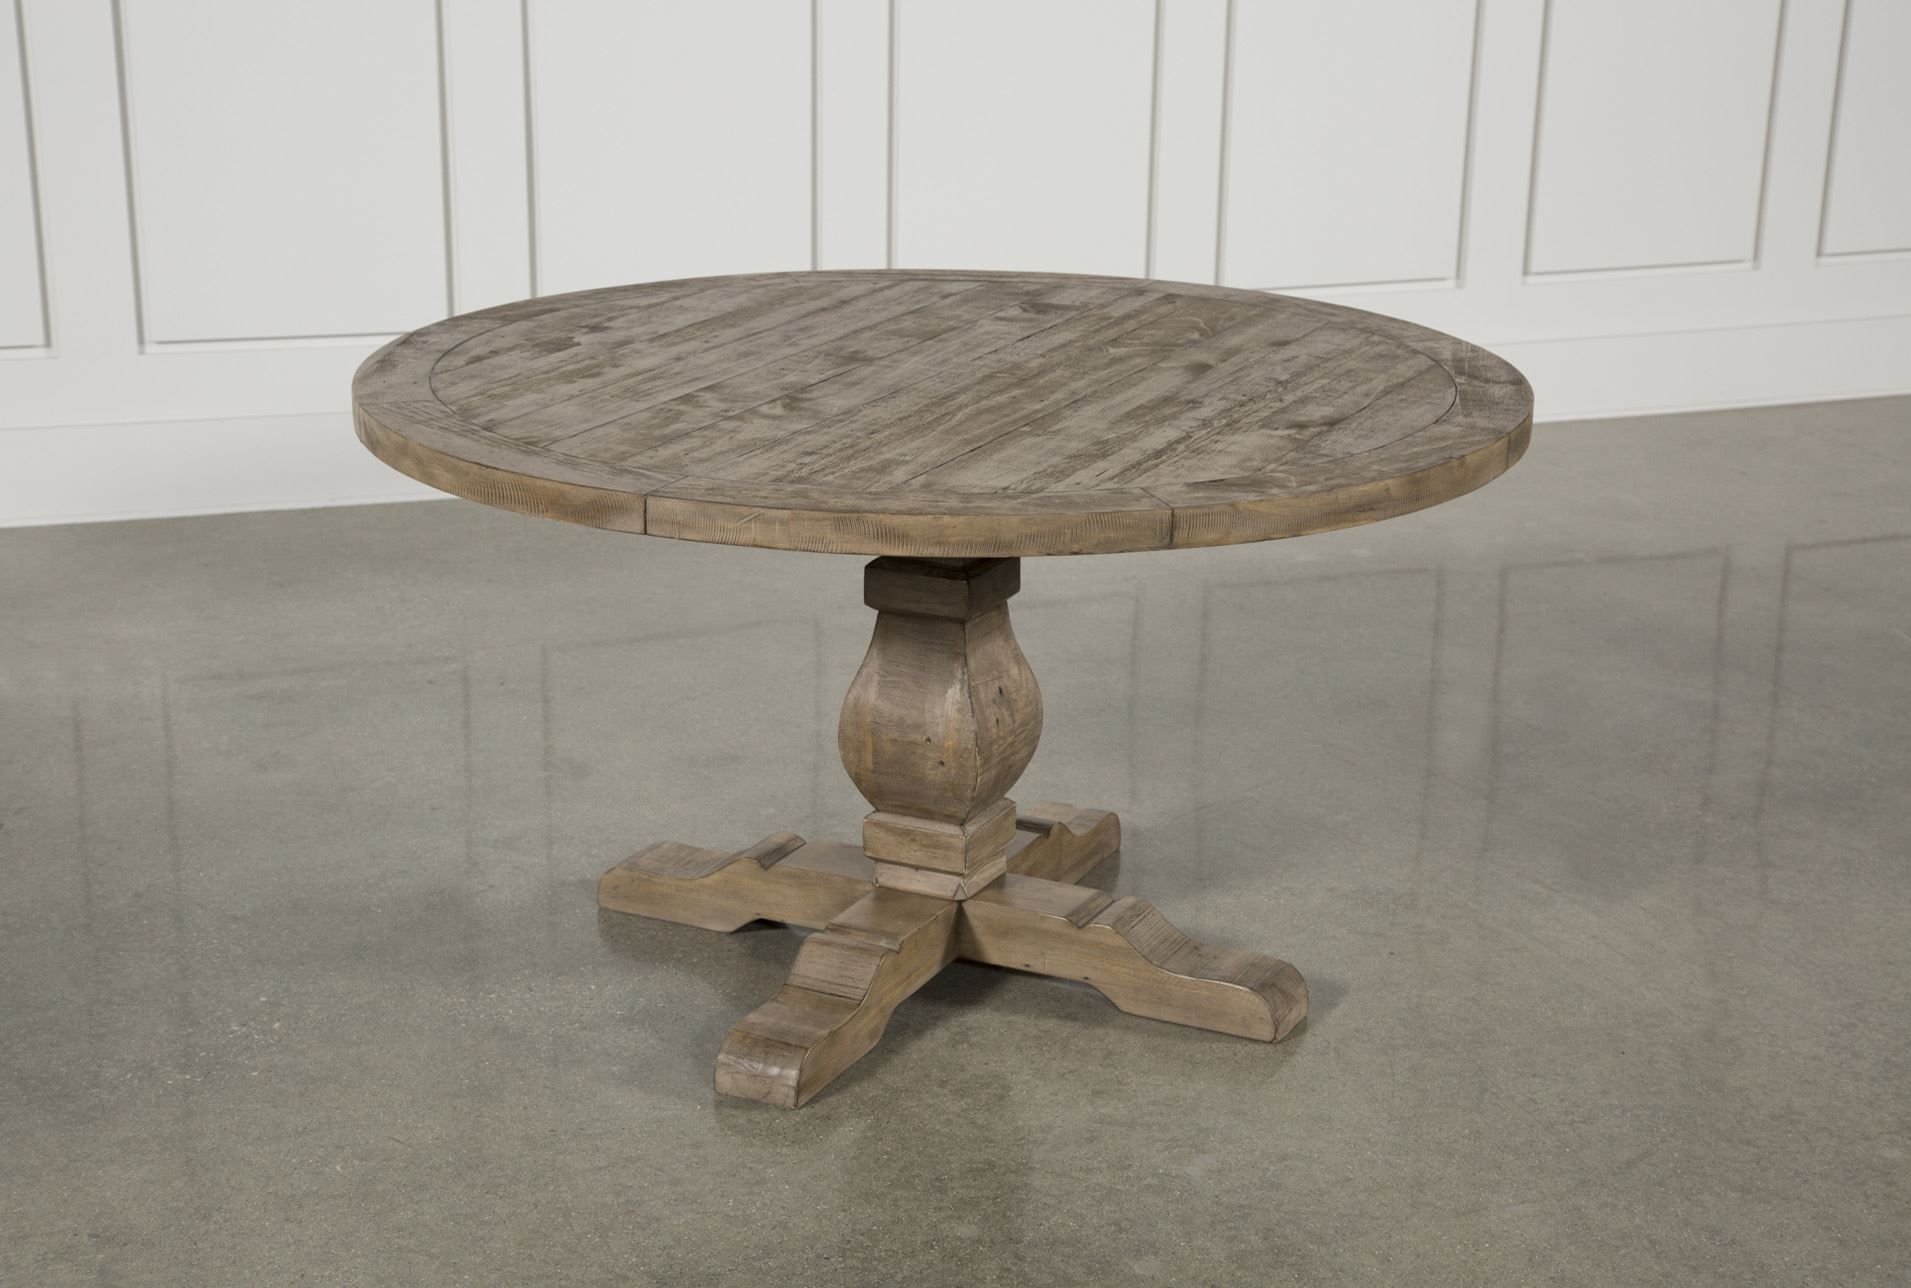 Caden Round Dining Table | Dockside | Pinterest | Round Dining Table Inside Most Popular Caden Round Dining Tables (View 1 of 20)